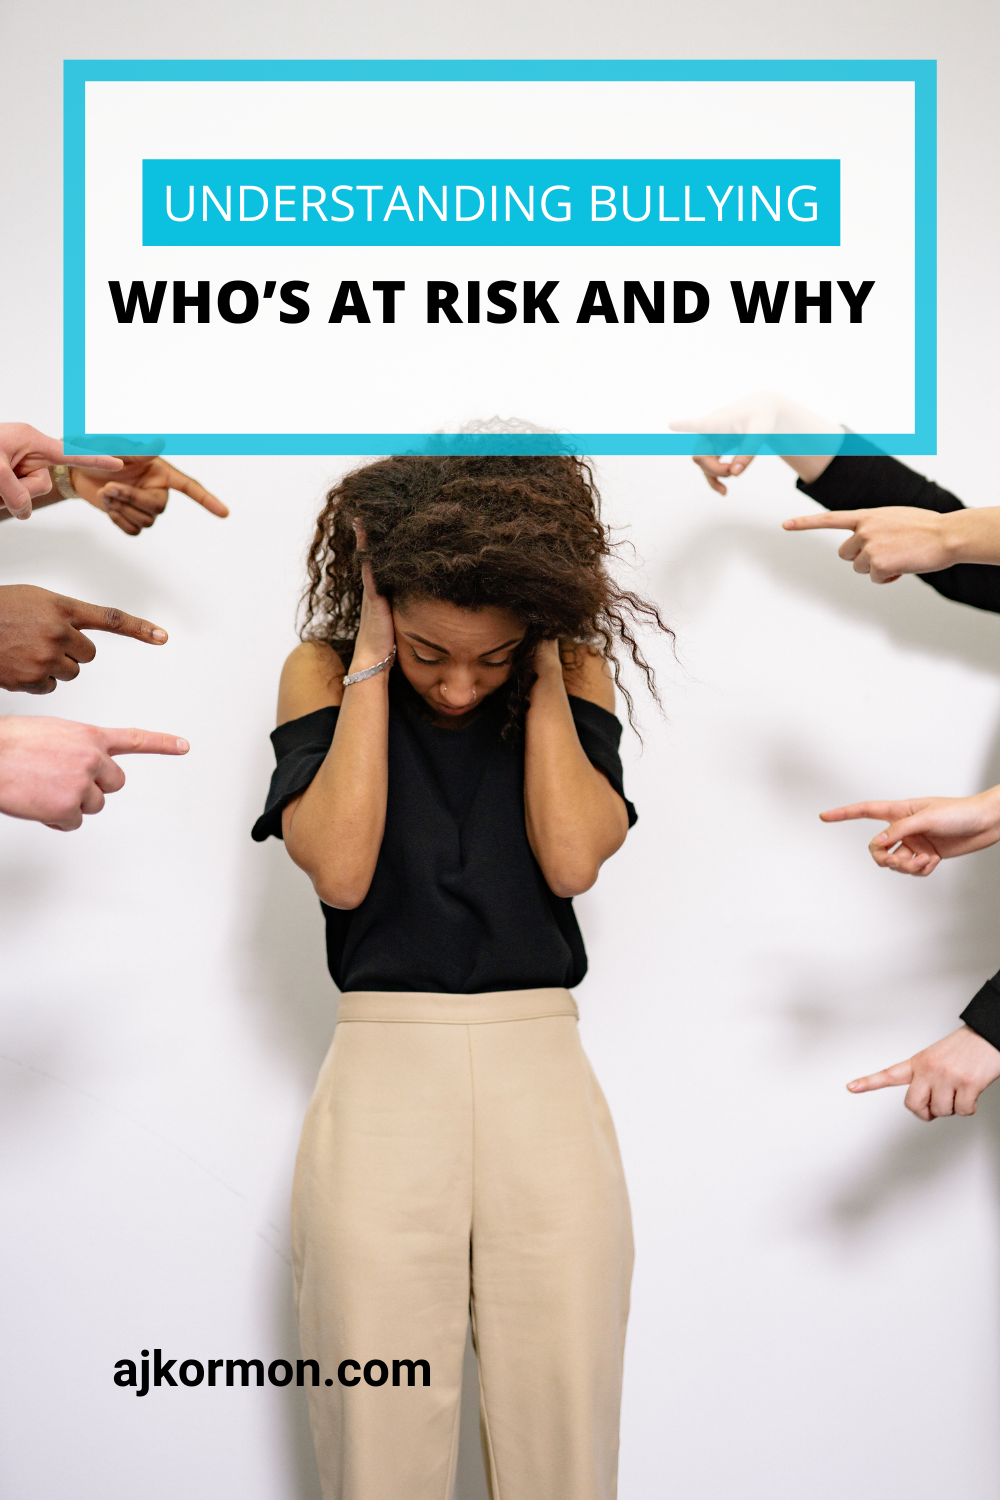 Understanding Bullying: Who's at Risk and Why